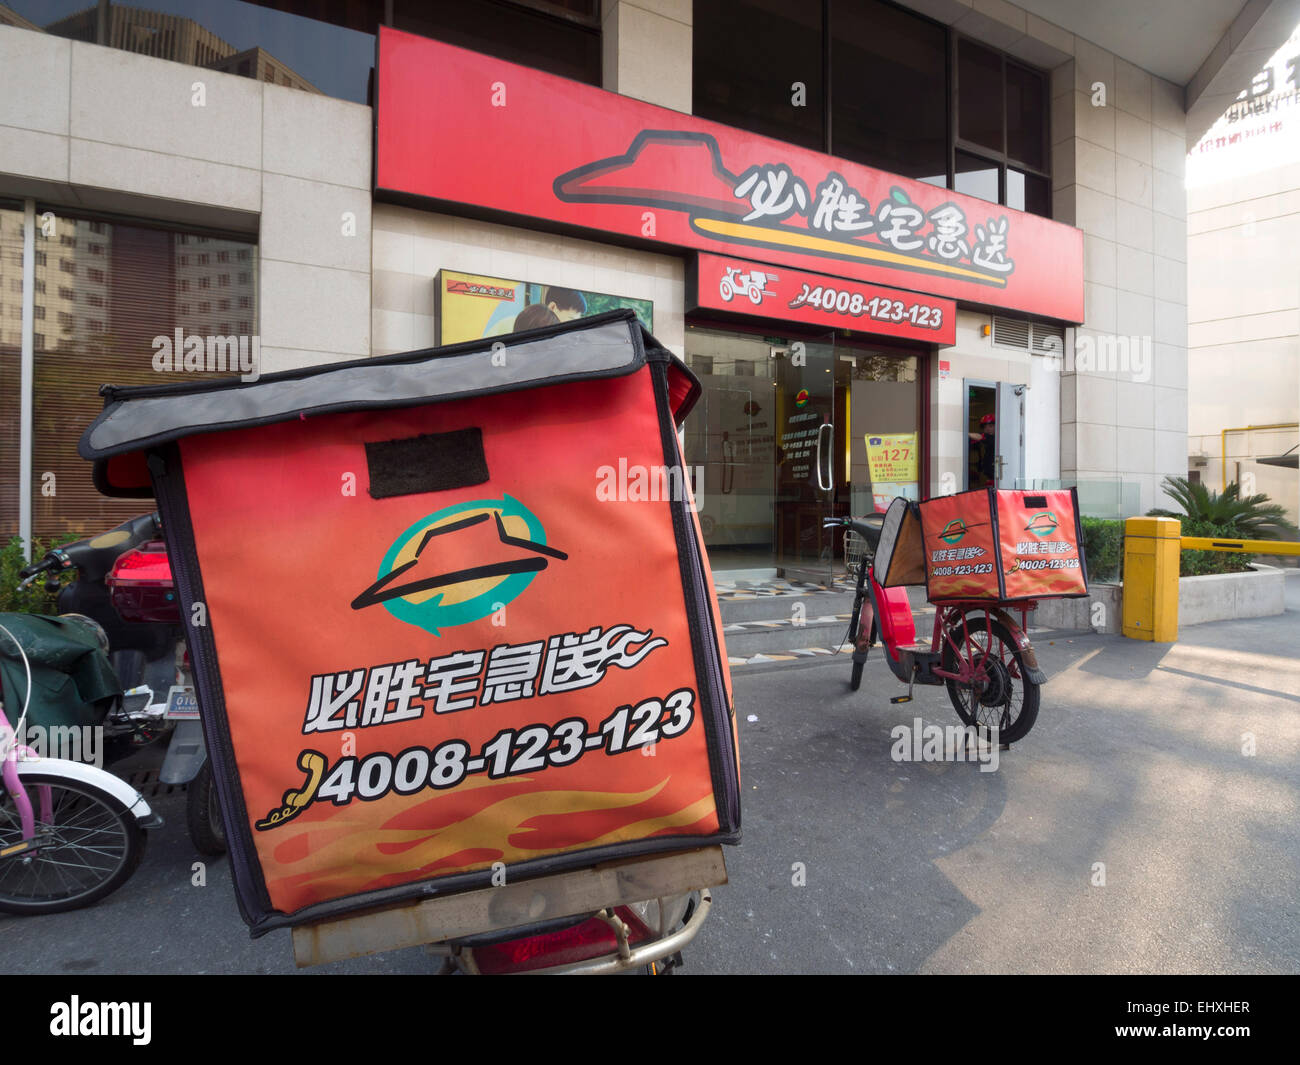 Delivery motorcycle outside a Pizza Hut restaurant in Shanghai, China Stock Photo